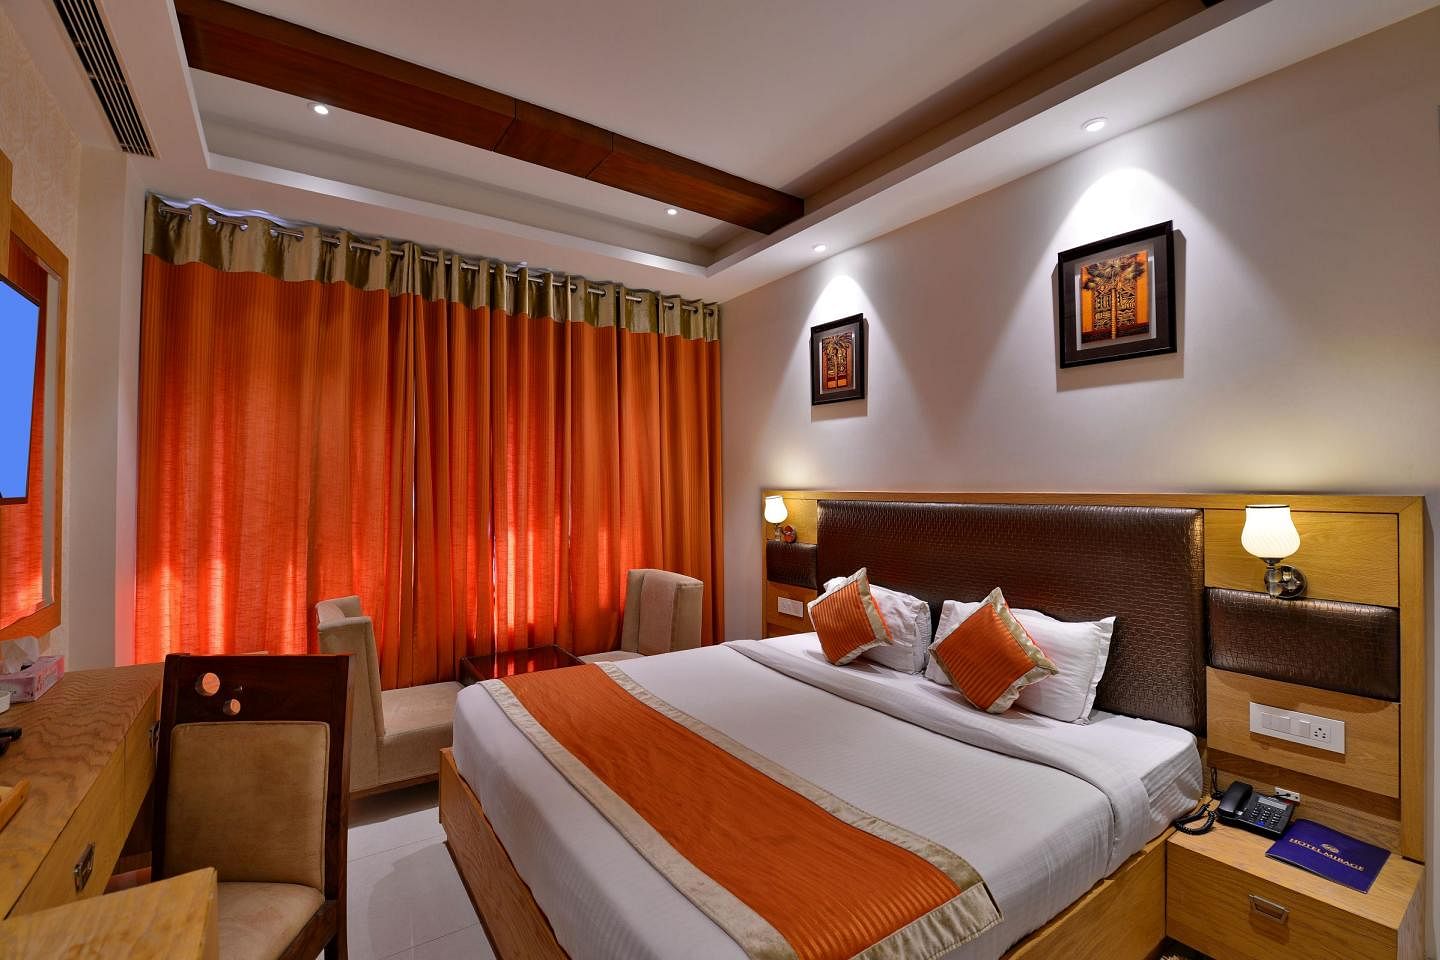 Hotel Mirage in Sector 70 Mohali, Chandigarh